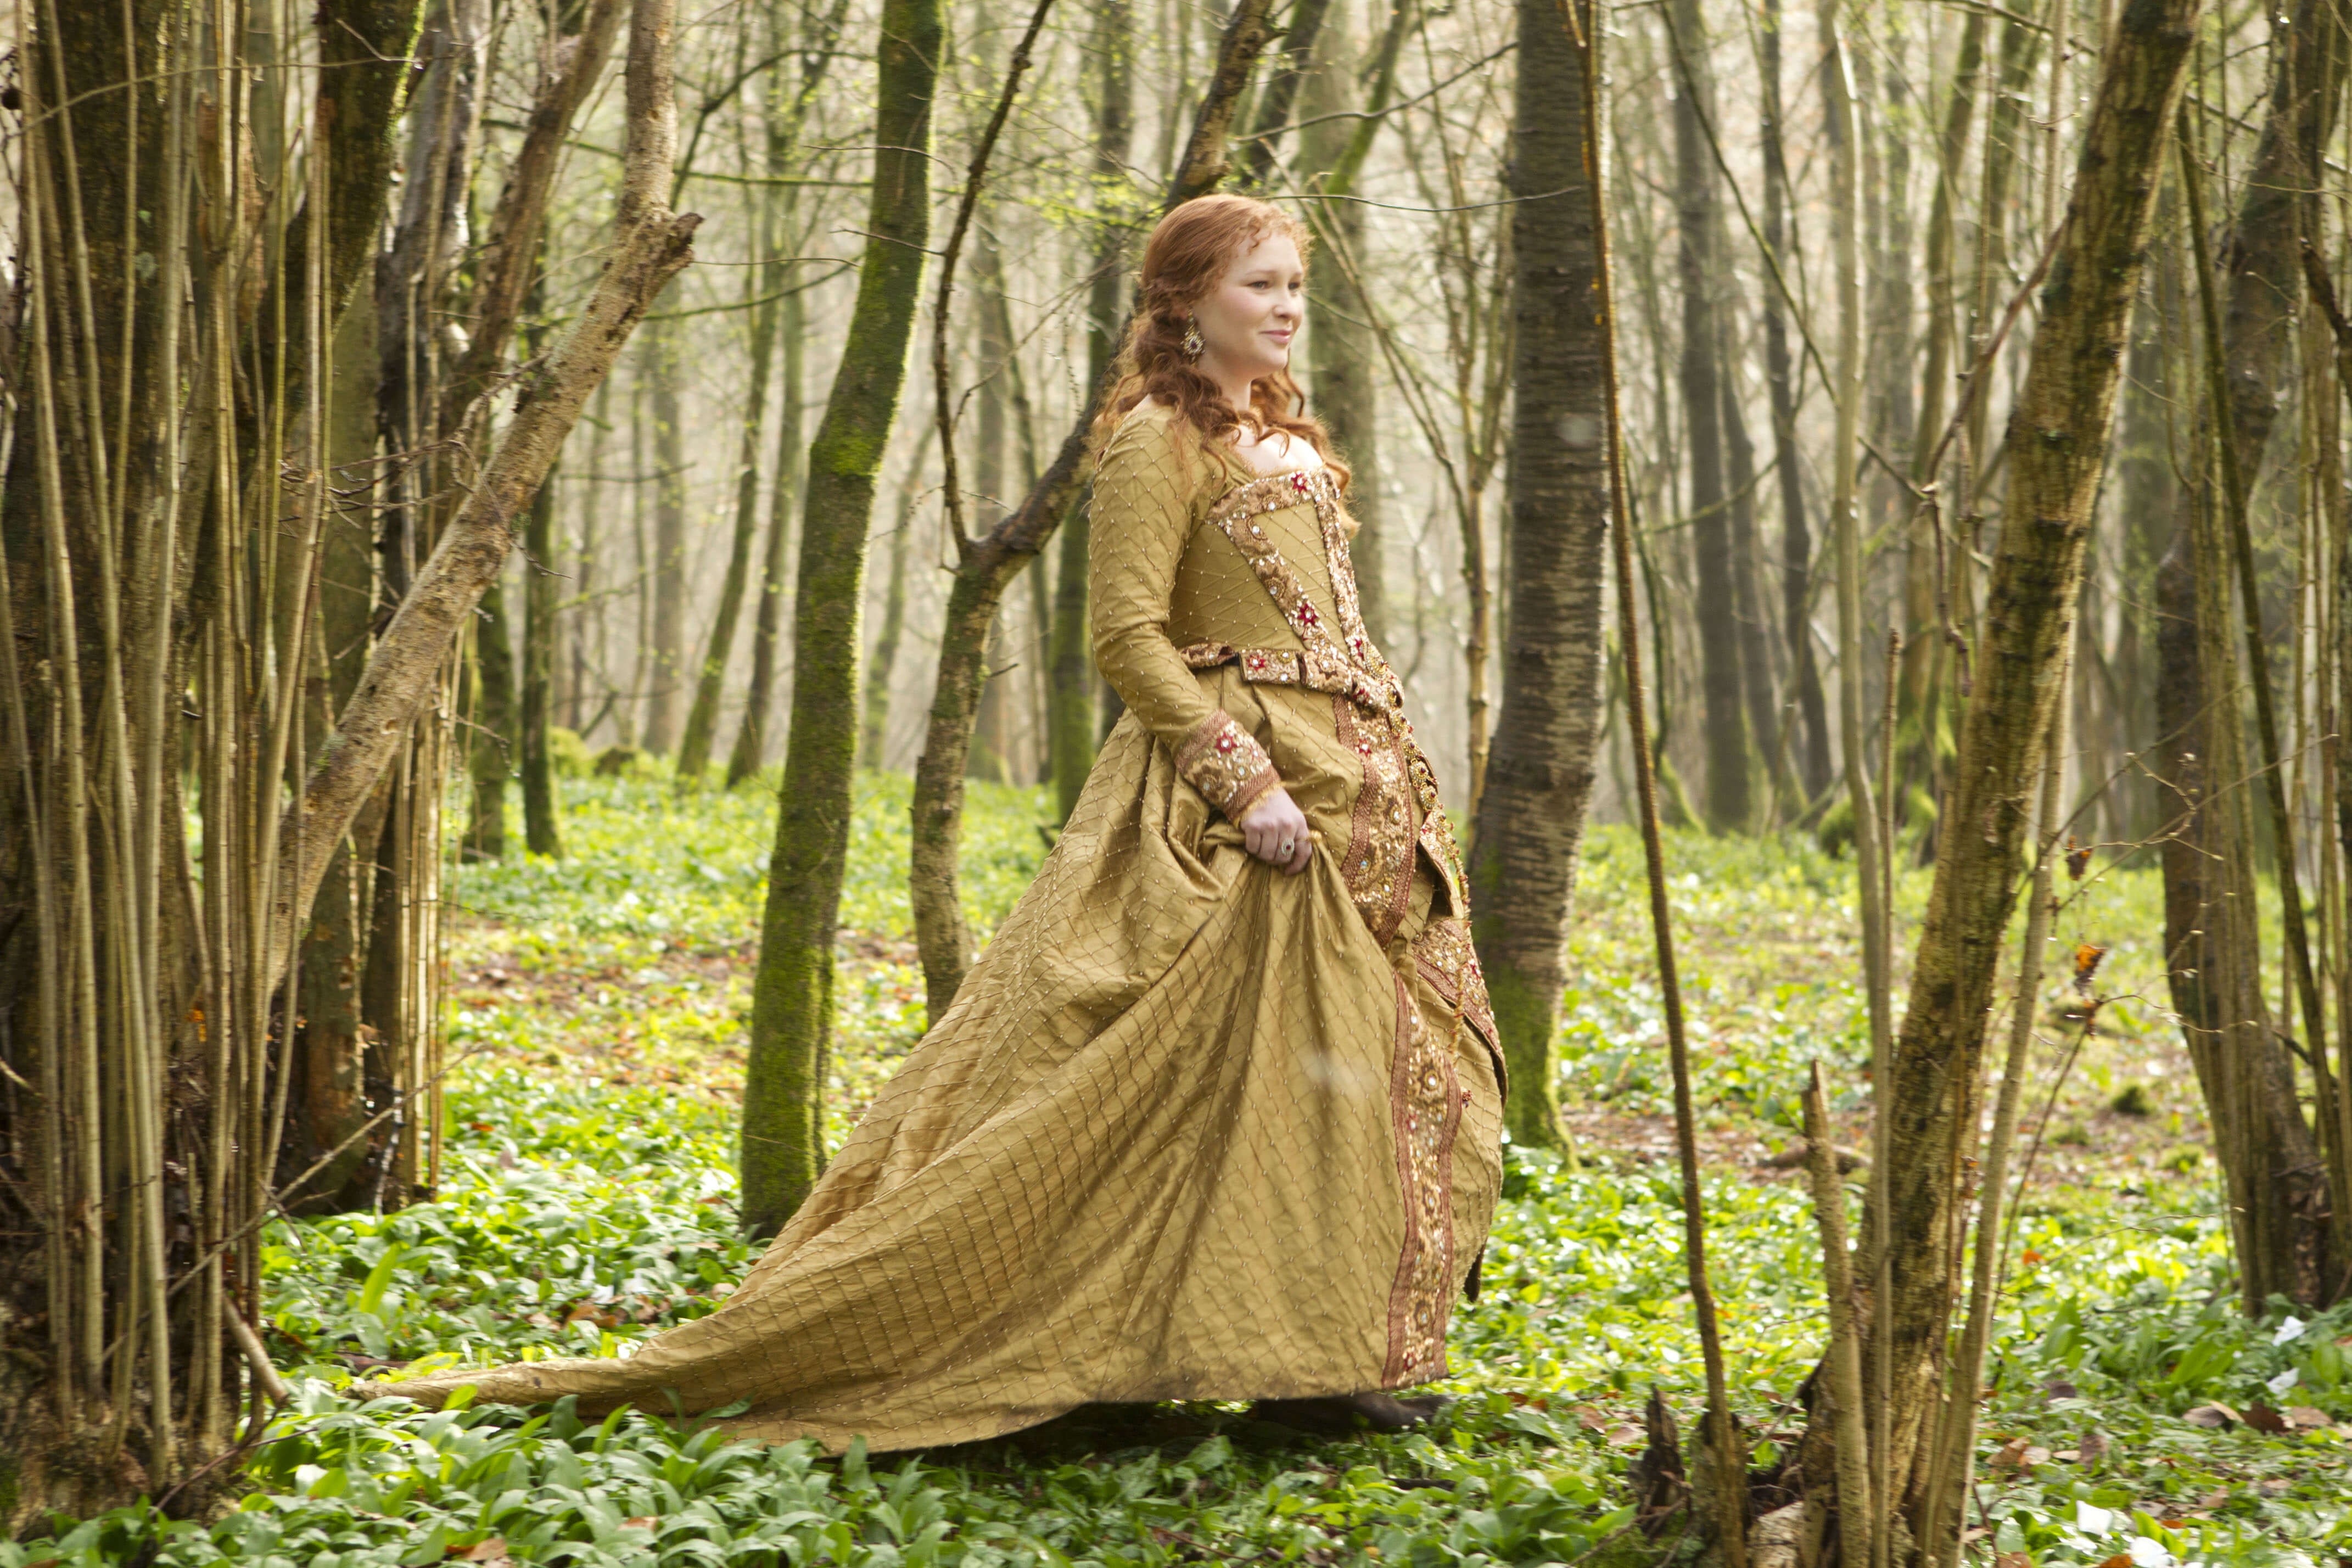 queen elizabeth i (joanna page) in the day of the doctor (2013).